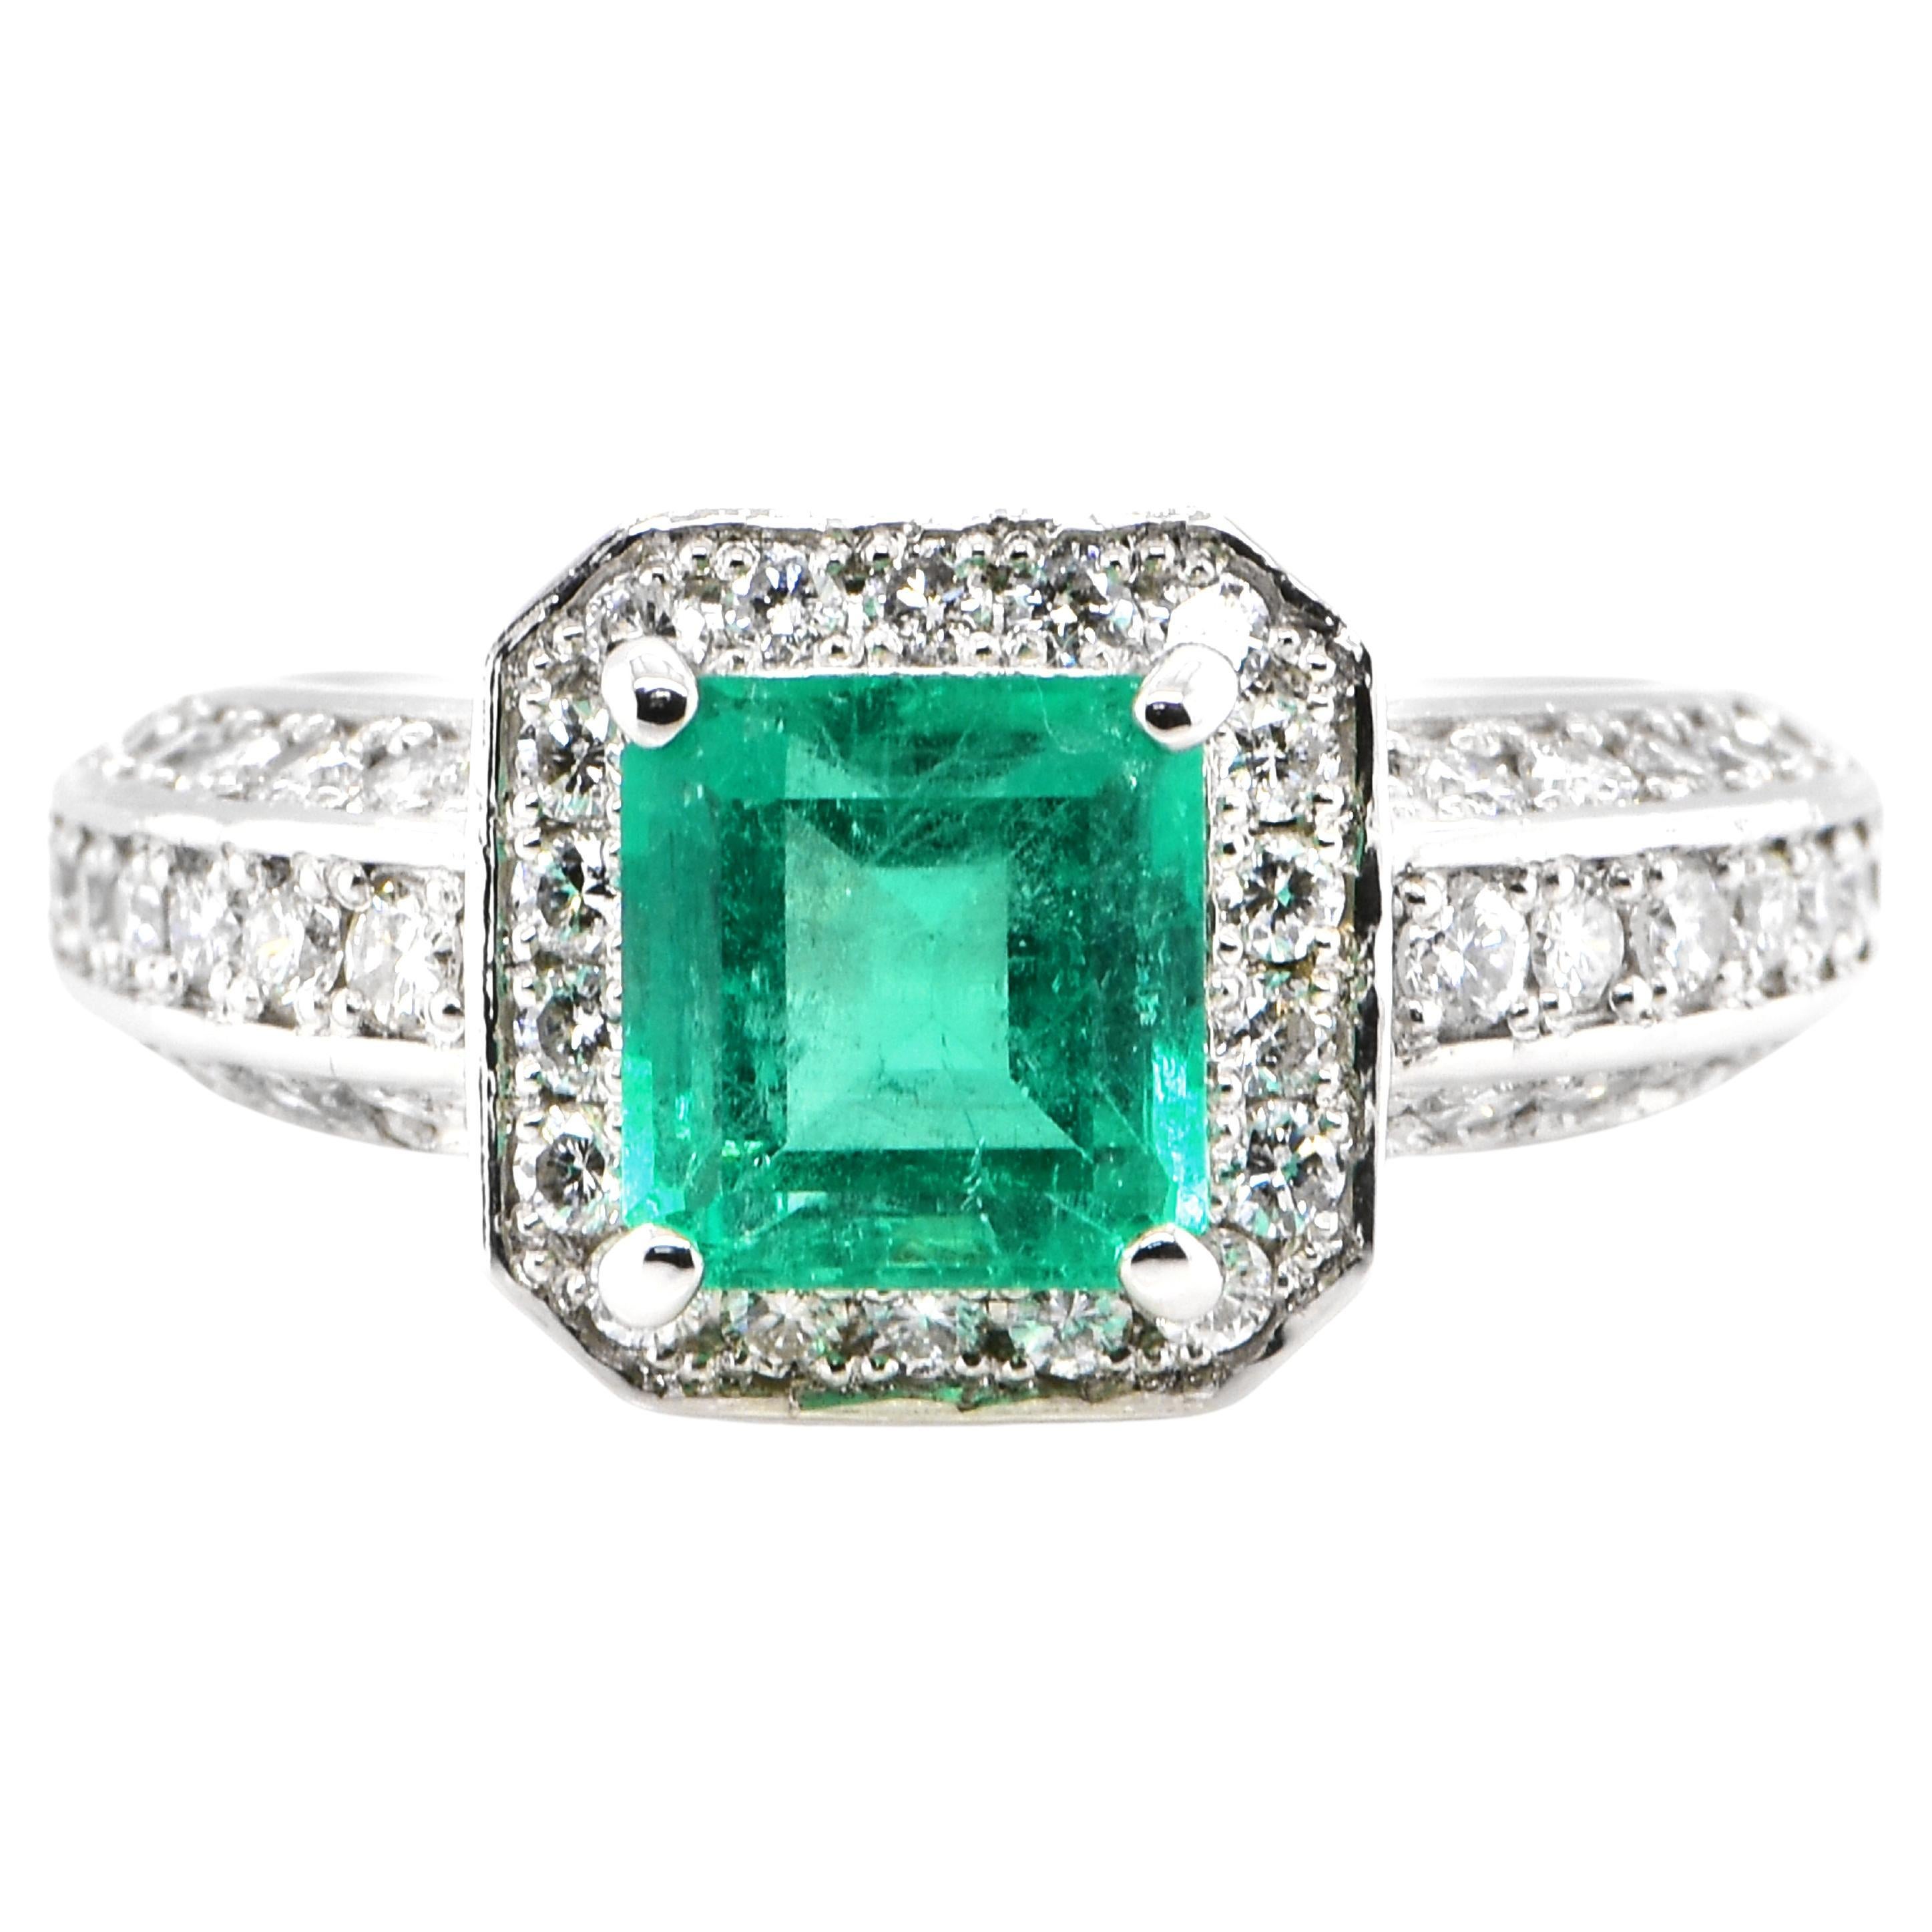 1.58 Carat Natural Colombian Emerald and Diamond Ring Set in Platinum For Sale